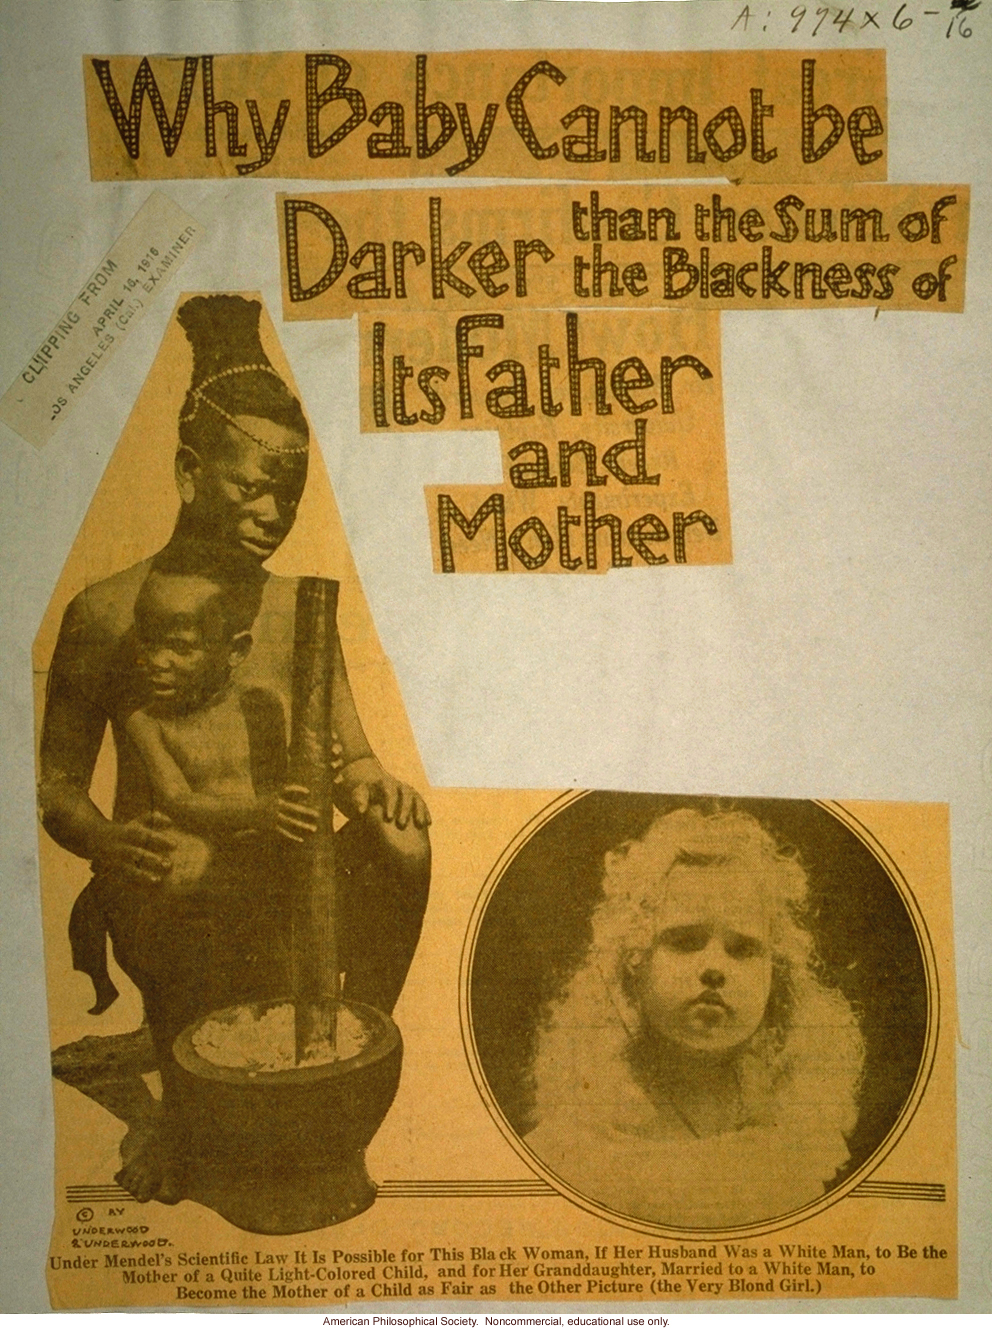 &quote;Why baby cannot be darker than the sum of the blackness of its mother and father,&quote; the Los Angeles Examiner